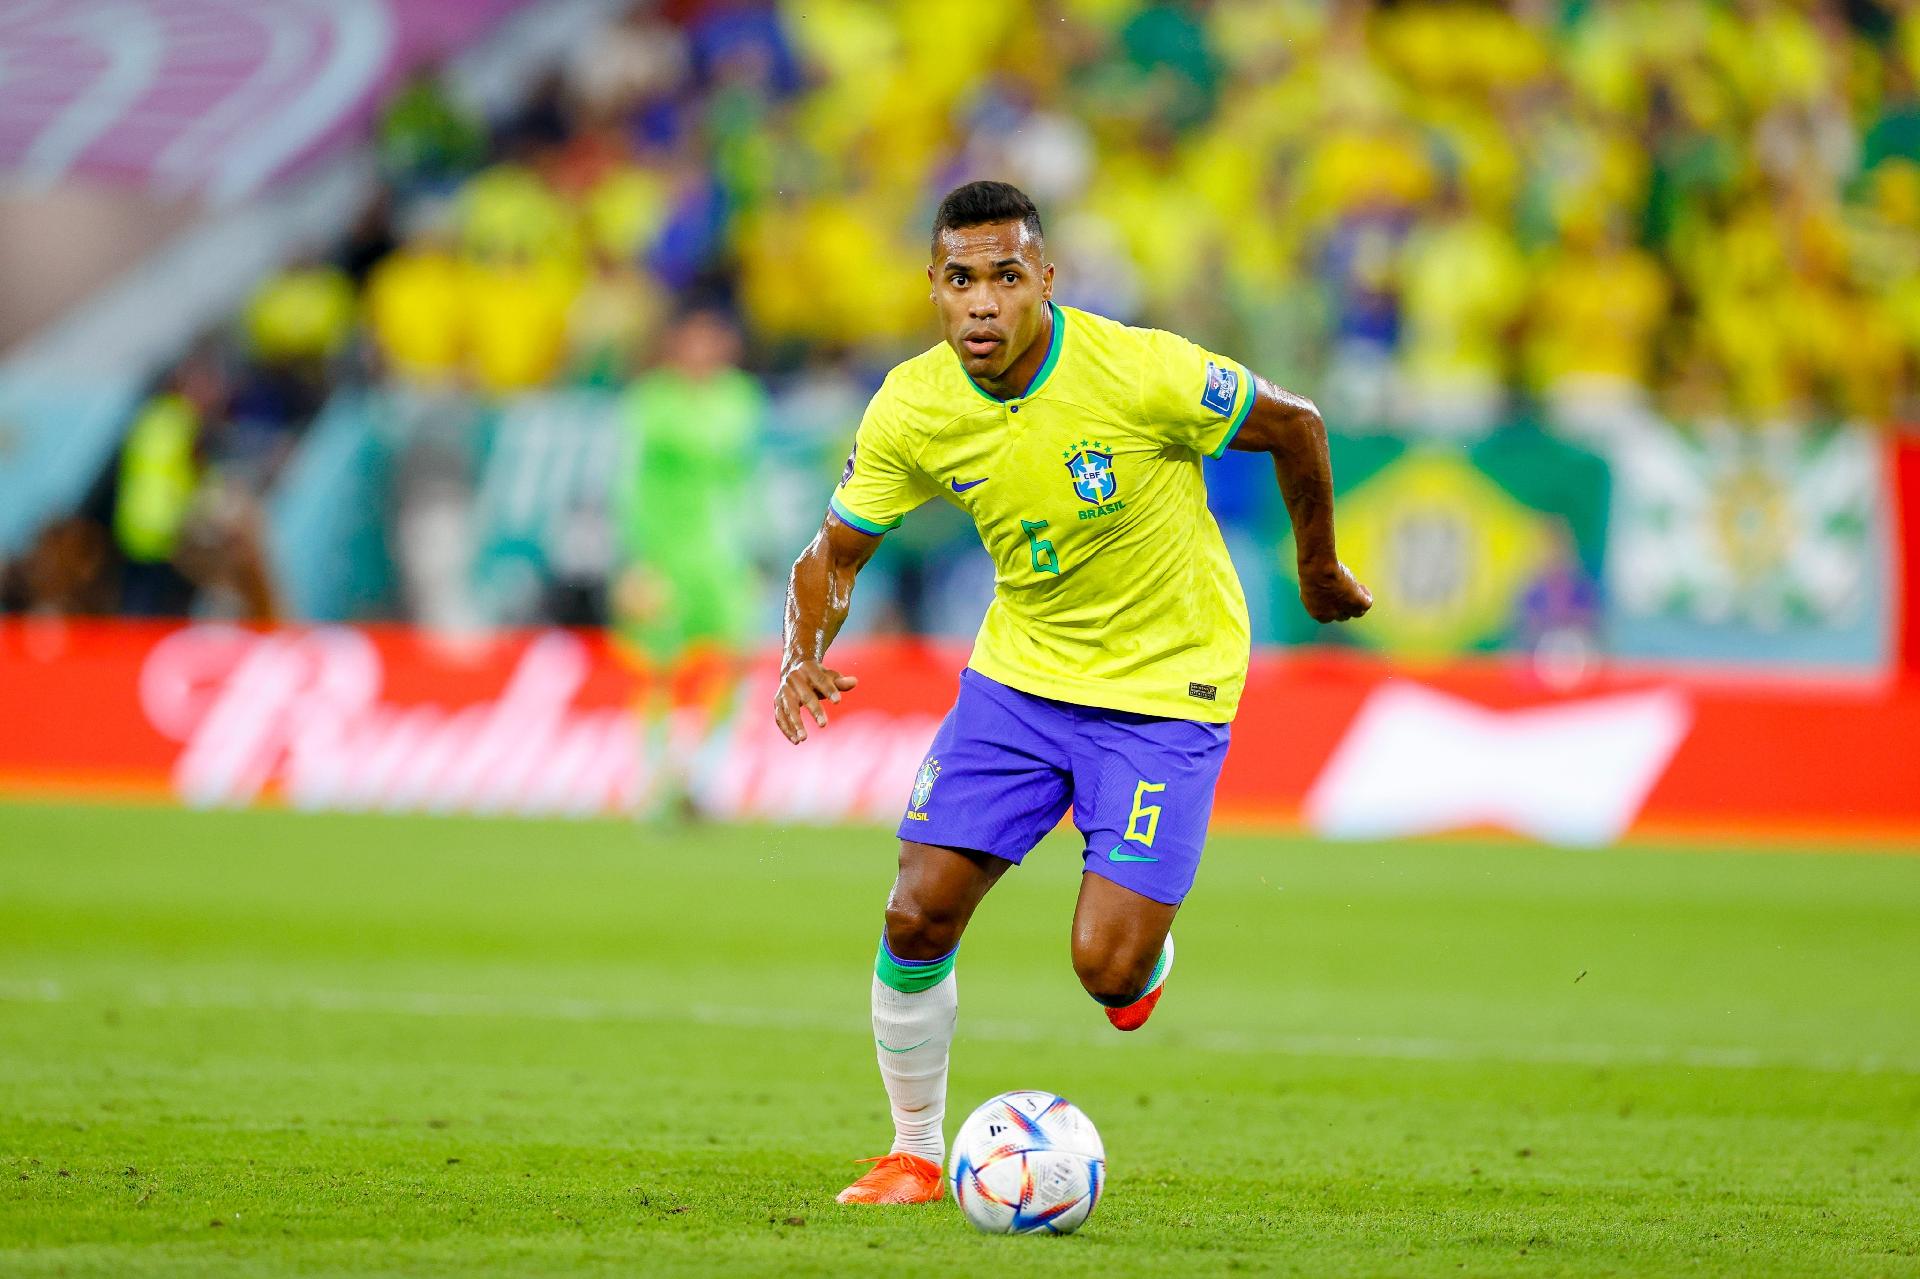 Alex Sandro in action for the Brazilian national team against Switzerland at the Qatar World Cup - DeFodi Images / Collaborator